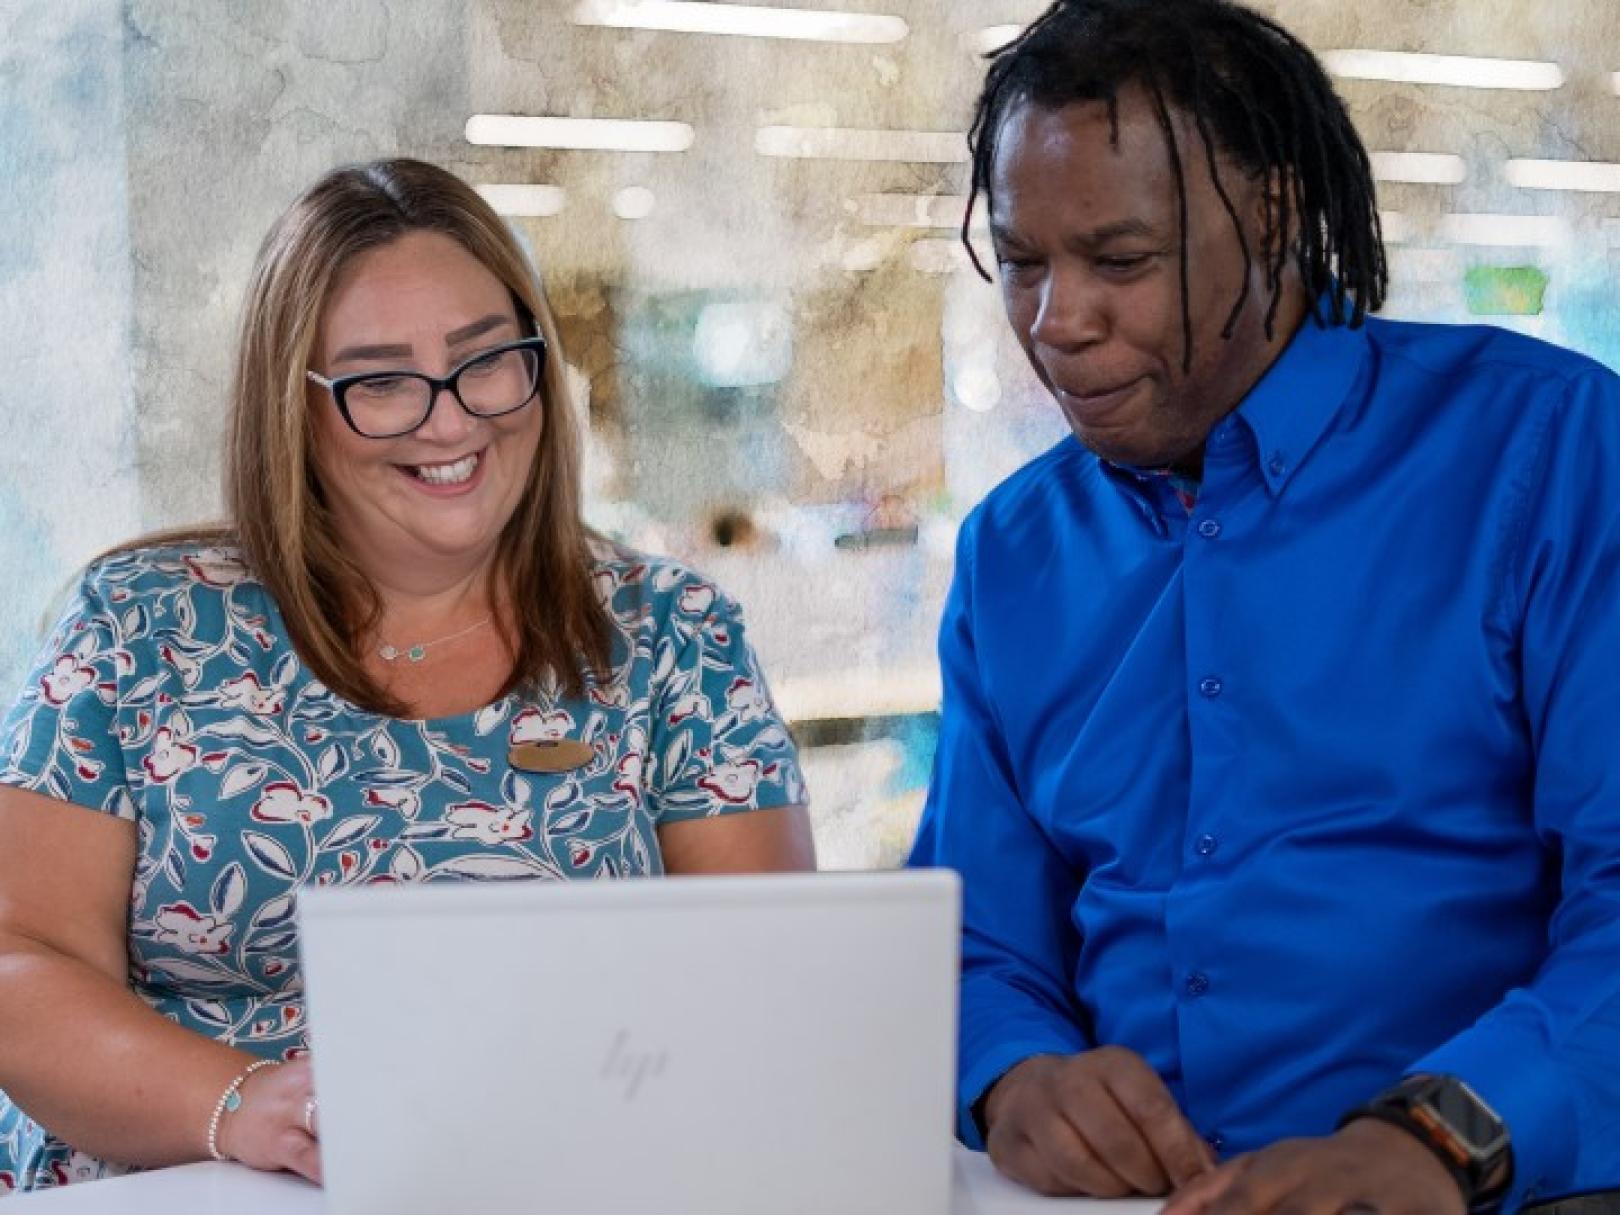 White woman and black man looking at a laptop together in an office